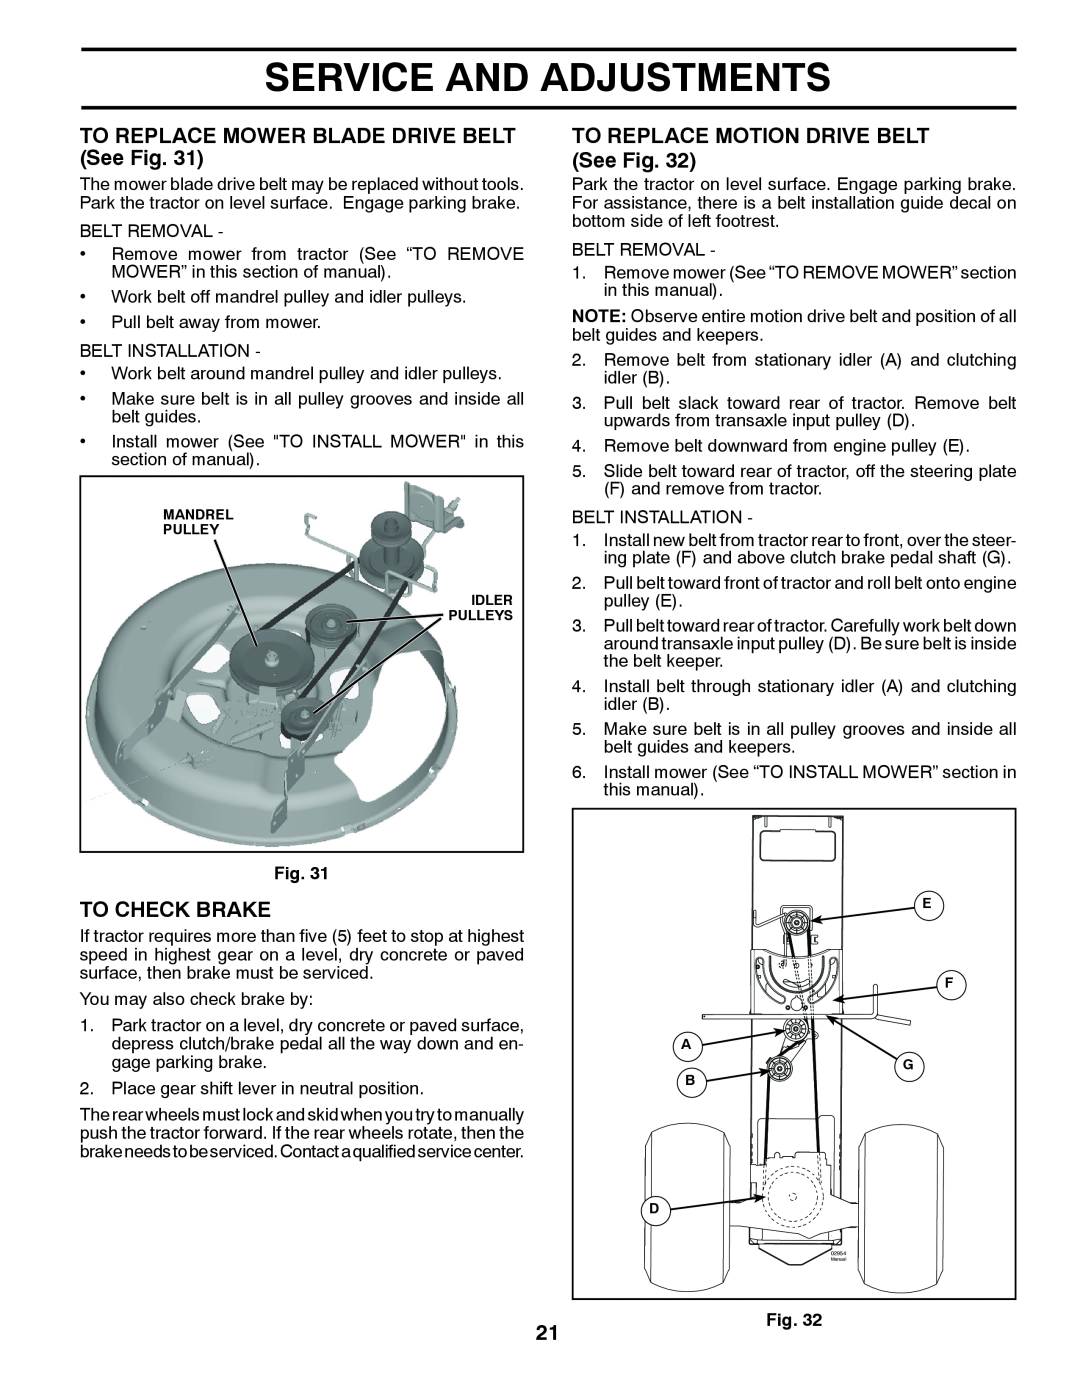 McCulloch M12530 manual TO REPLACE MOWER BLADE DRIVE BELT See Fig, TO REPLACE MOTION DRIVE BELT See Fig, To Check Brake 